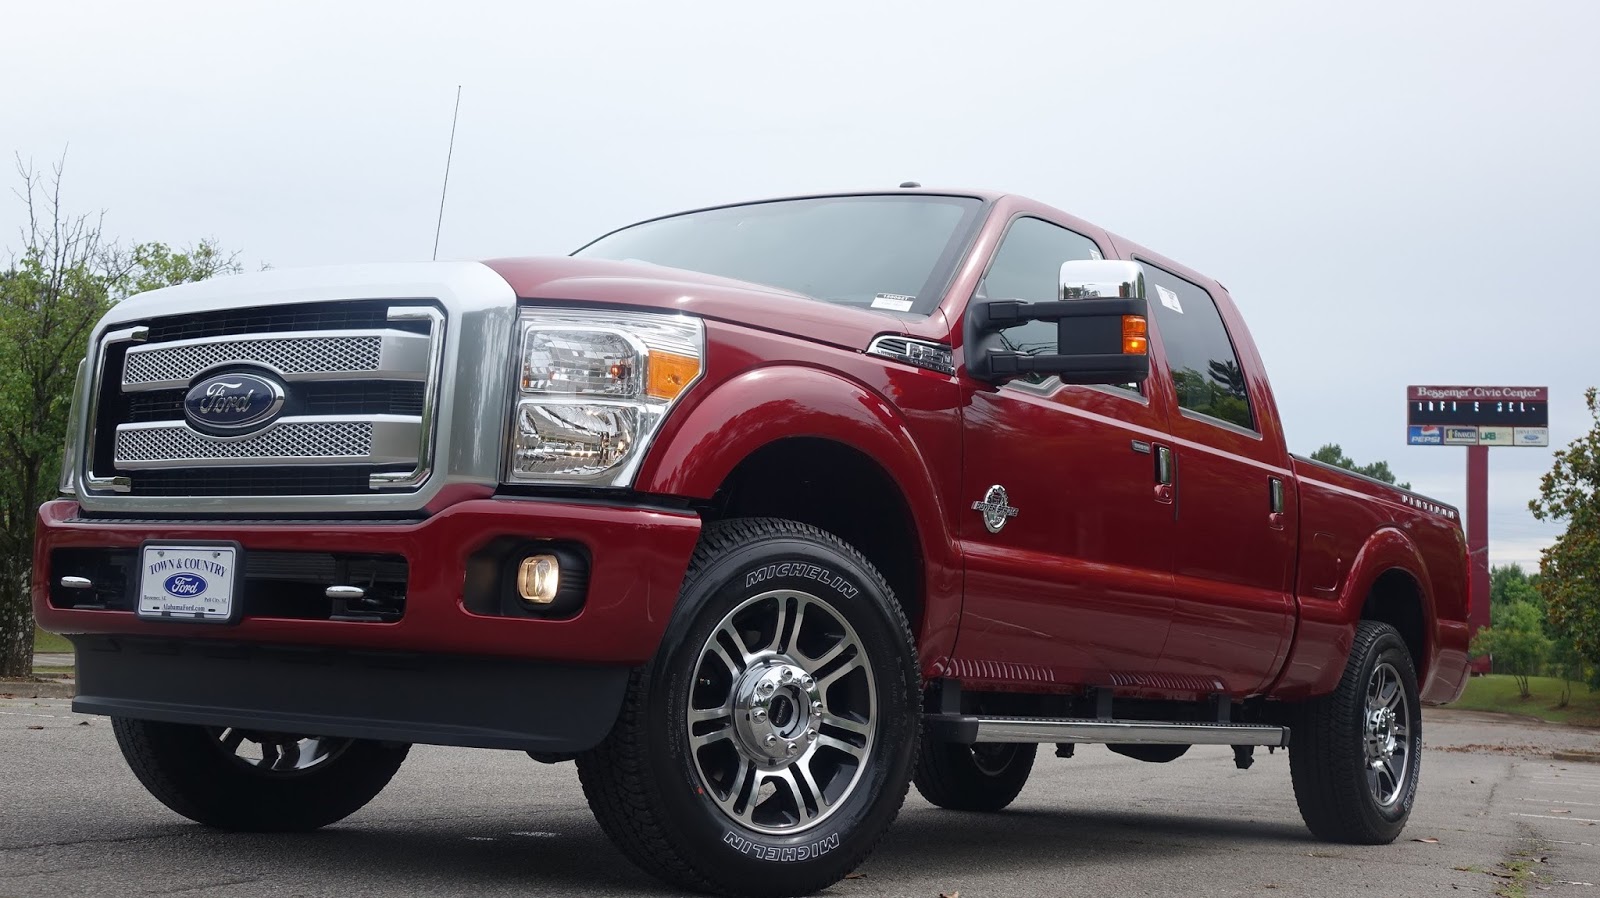 MEC&F Expert Engineers : A 2015 F250 pick-up truck driver killed in a ...